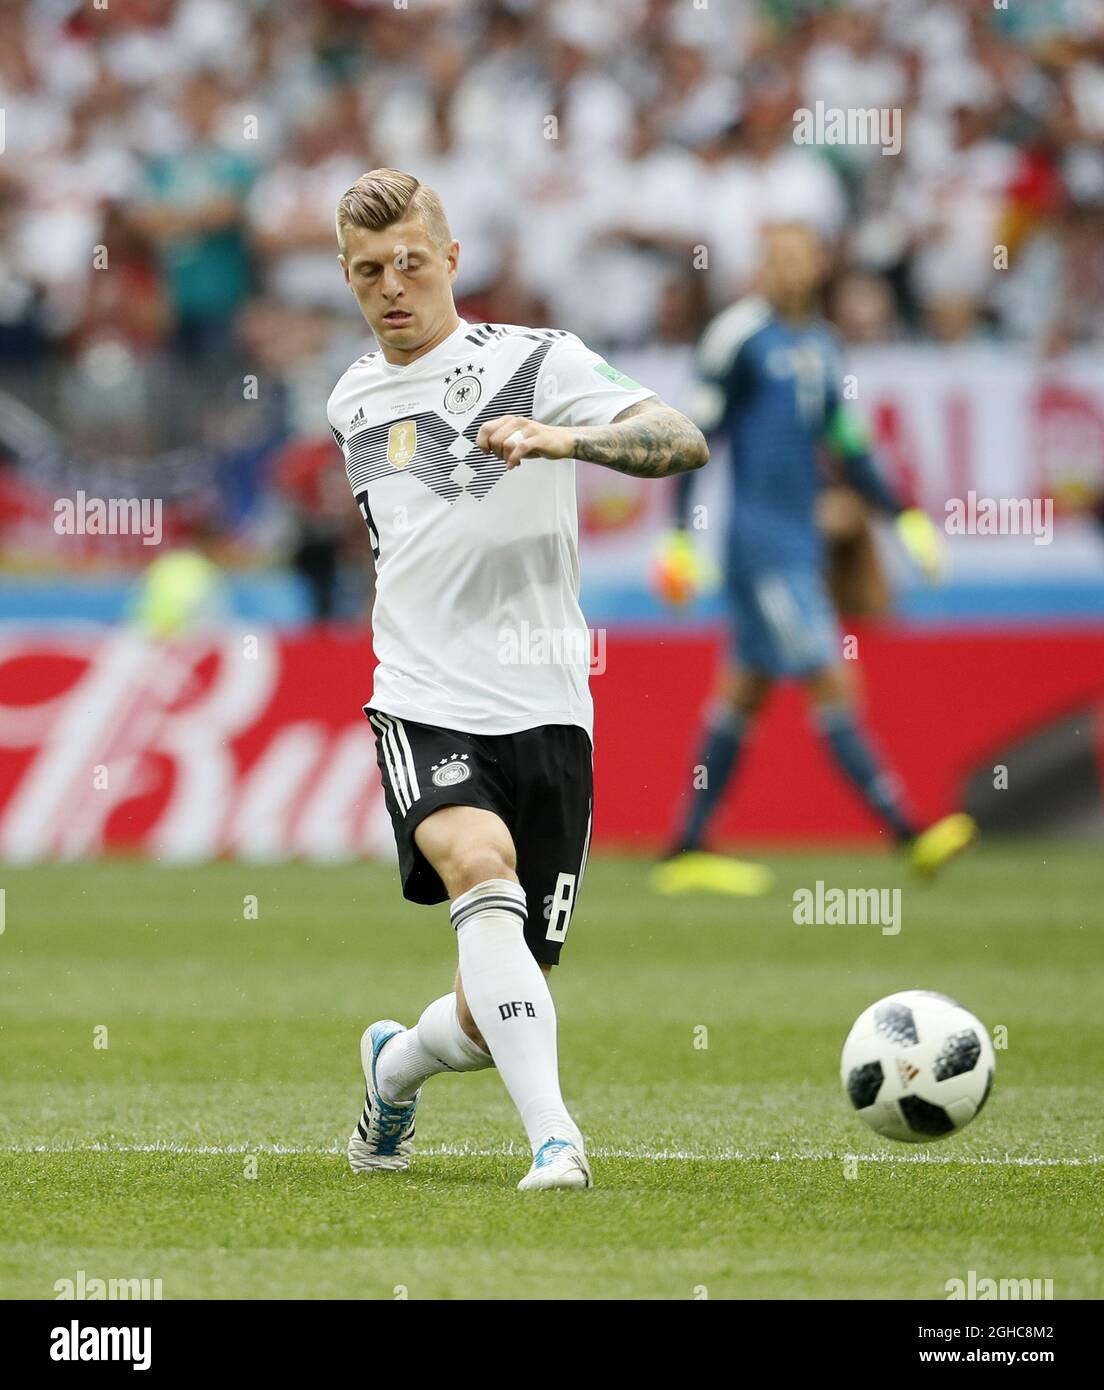 Germany's Toni Kroos in action during the FIFA World Cup 2018 Group F match at the Luzhniki Stadium, Moscow. Picture date 17th June 2018. Picture credit should read: David Klein/Sportimage via PA Images Stock Photo